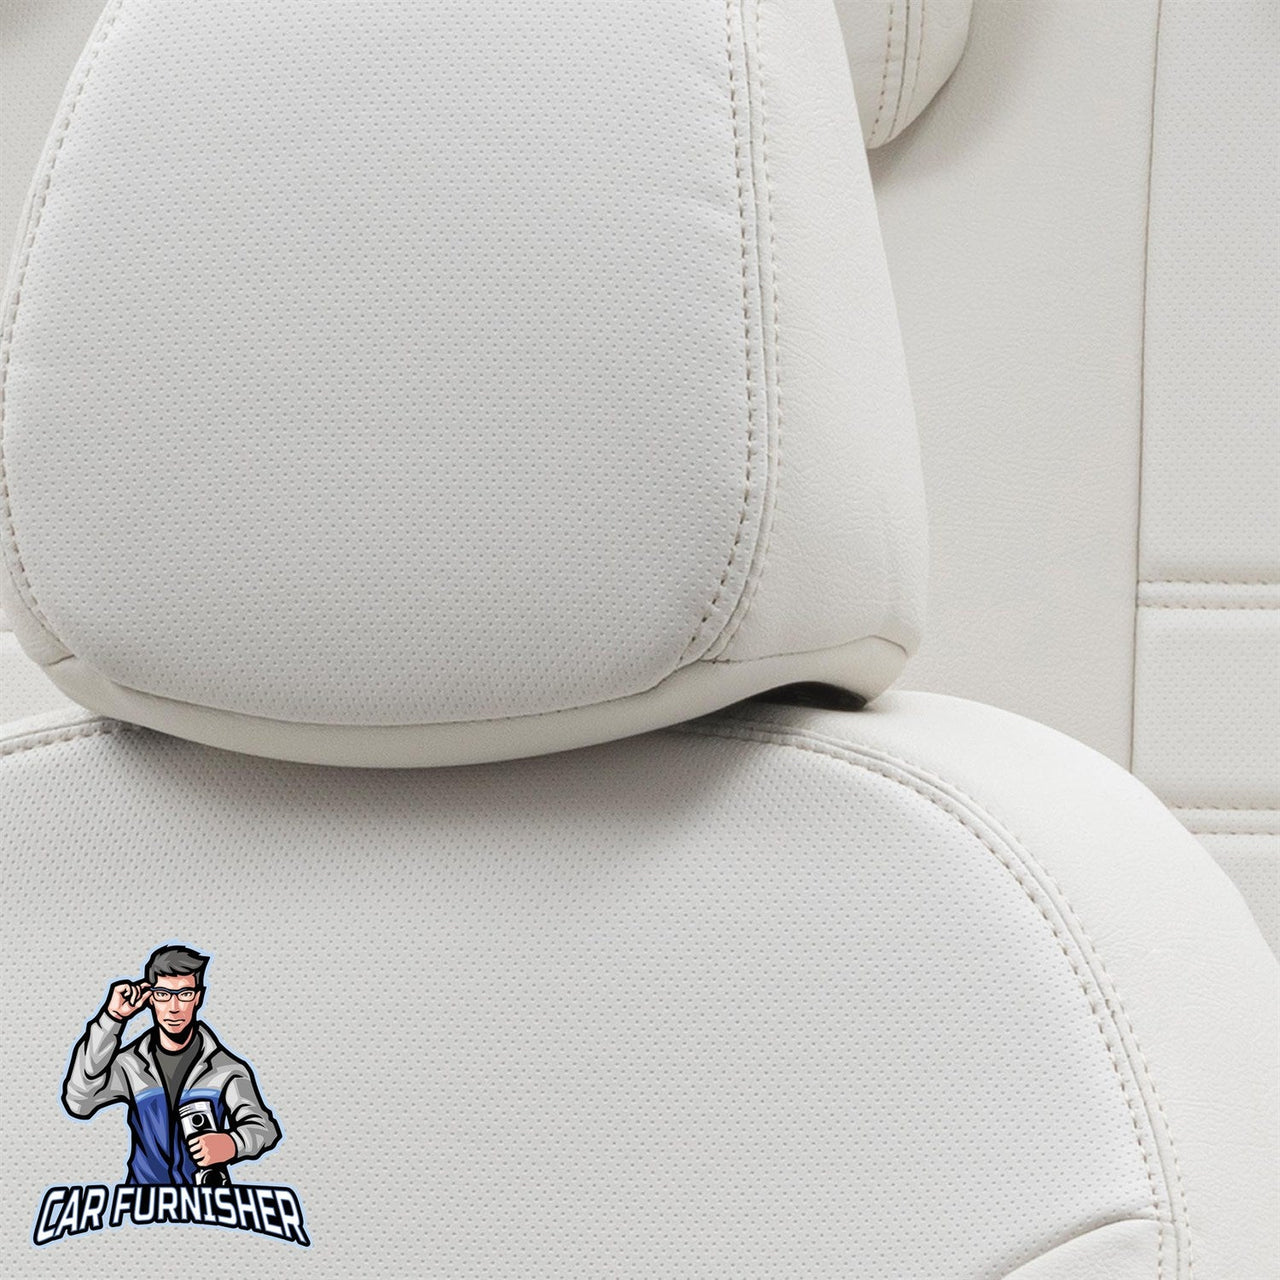 Jeep Compass Seat Covers Istanbul Leather Design Ivory Leather